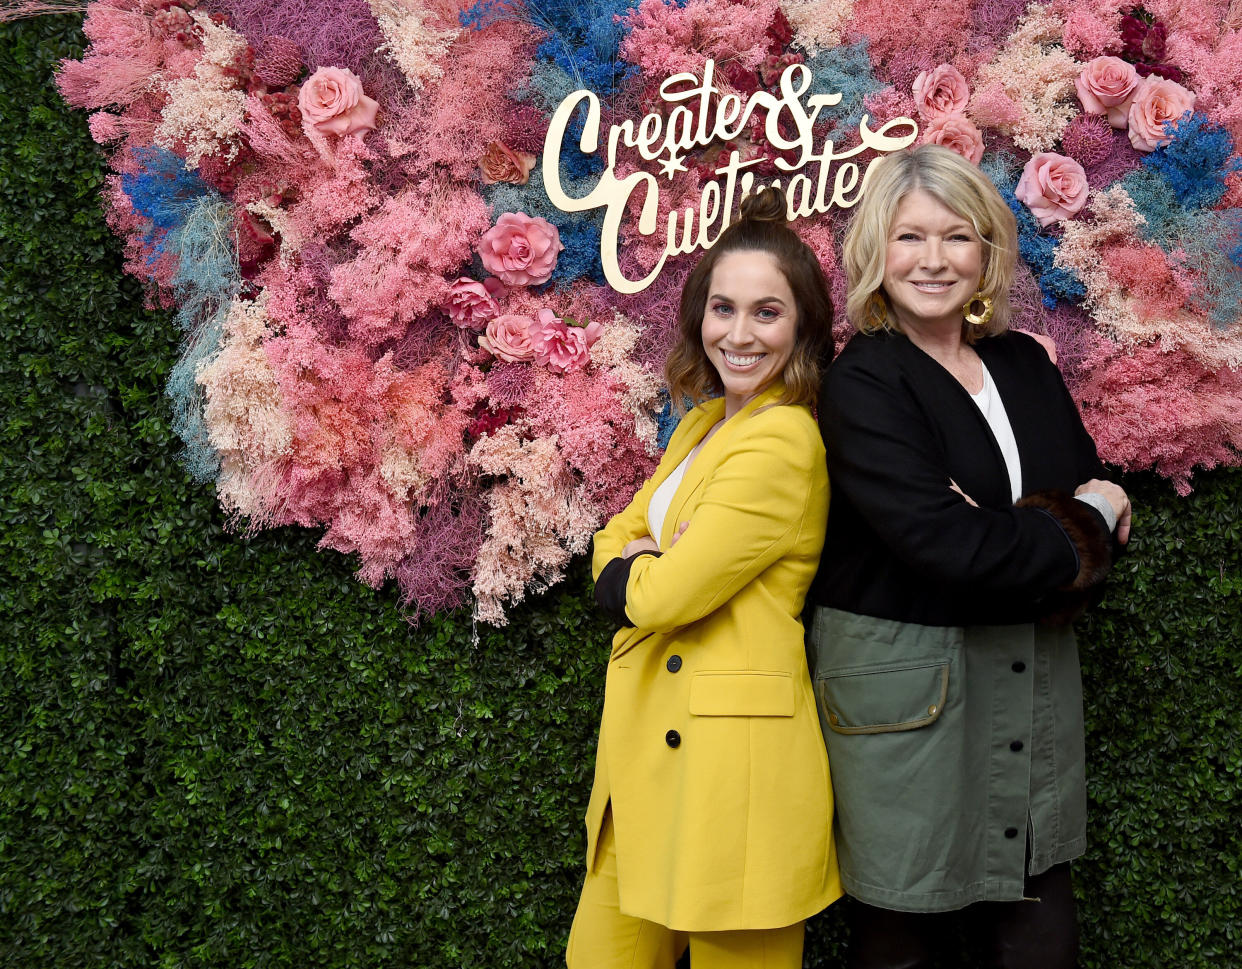 BROOKLYN, NEW YORK - MAY 04:  Jaclyn Johnson and Martha Stewart attend Create & Cultivate New York presented by Mastercard at Industry City on May 04, 2019 in Brooklyn, New York. (Photo by Ilya S. Savenok/Getty Images for Create & Cultivate)